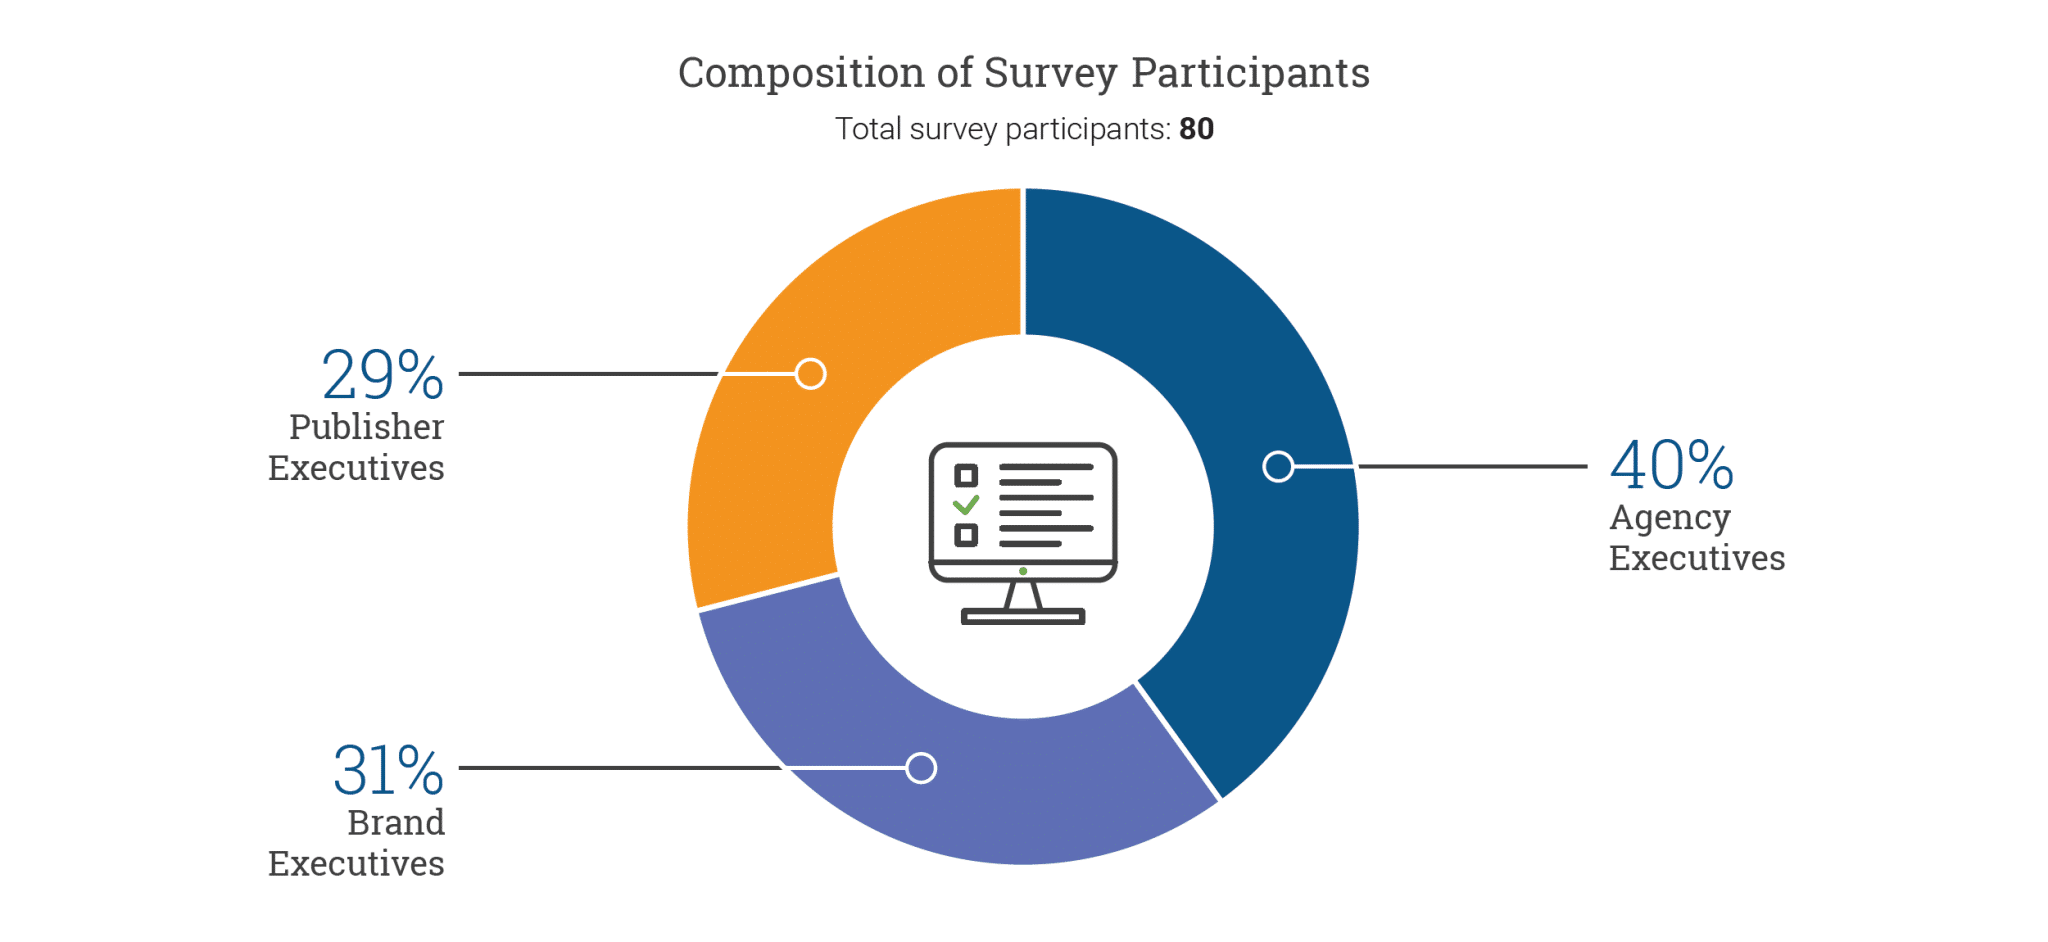 State of the Industry - Composition of Survey Participants